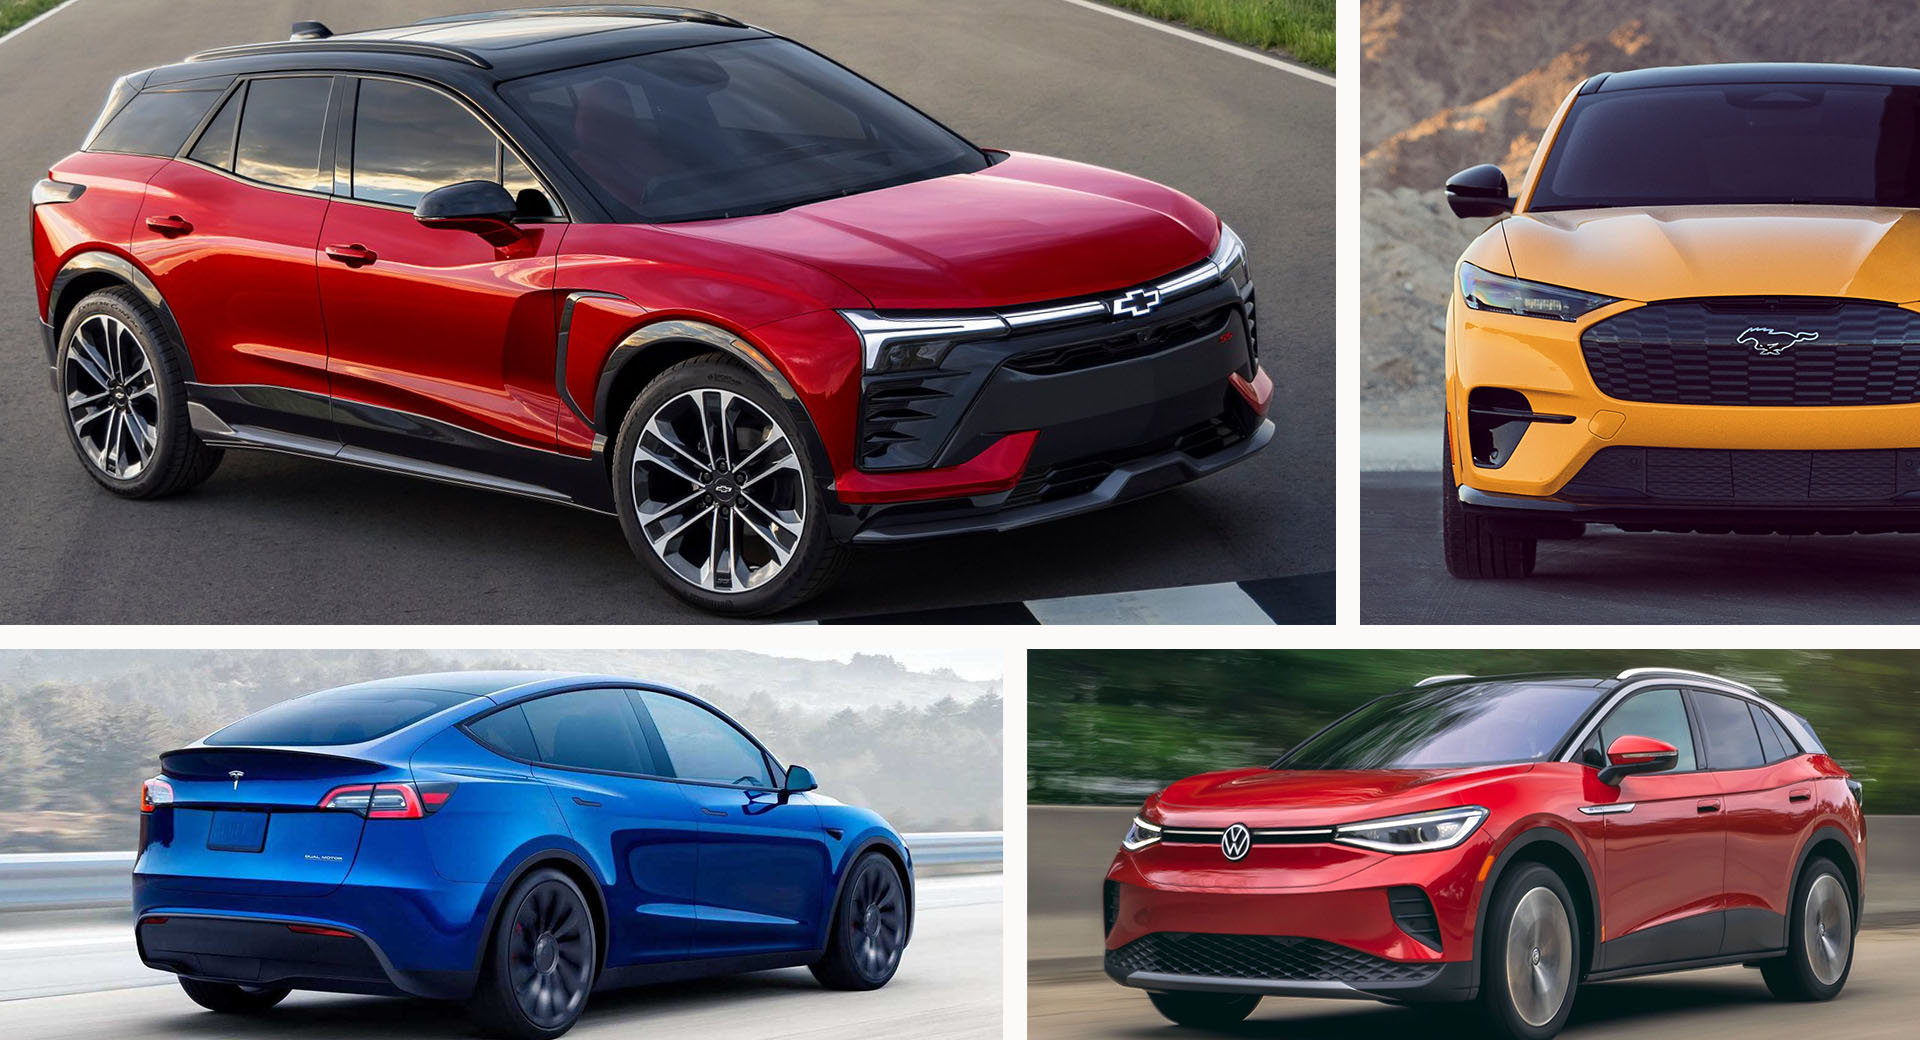 2024 Chevy Blazer Vs. Ford, Tesla And VW Rivals: Who Has The Longest Electric Range, The Most Power And The Biggest Screen? Auto Recent